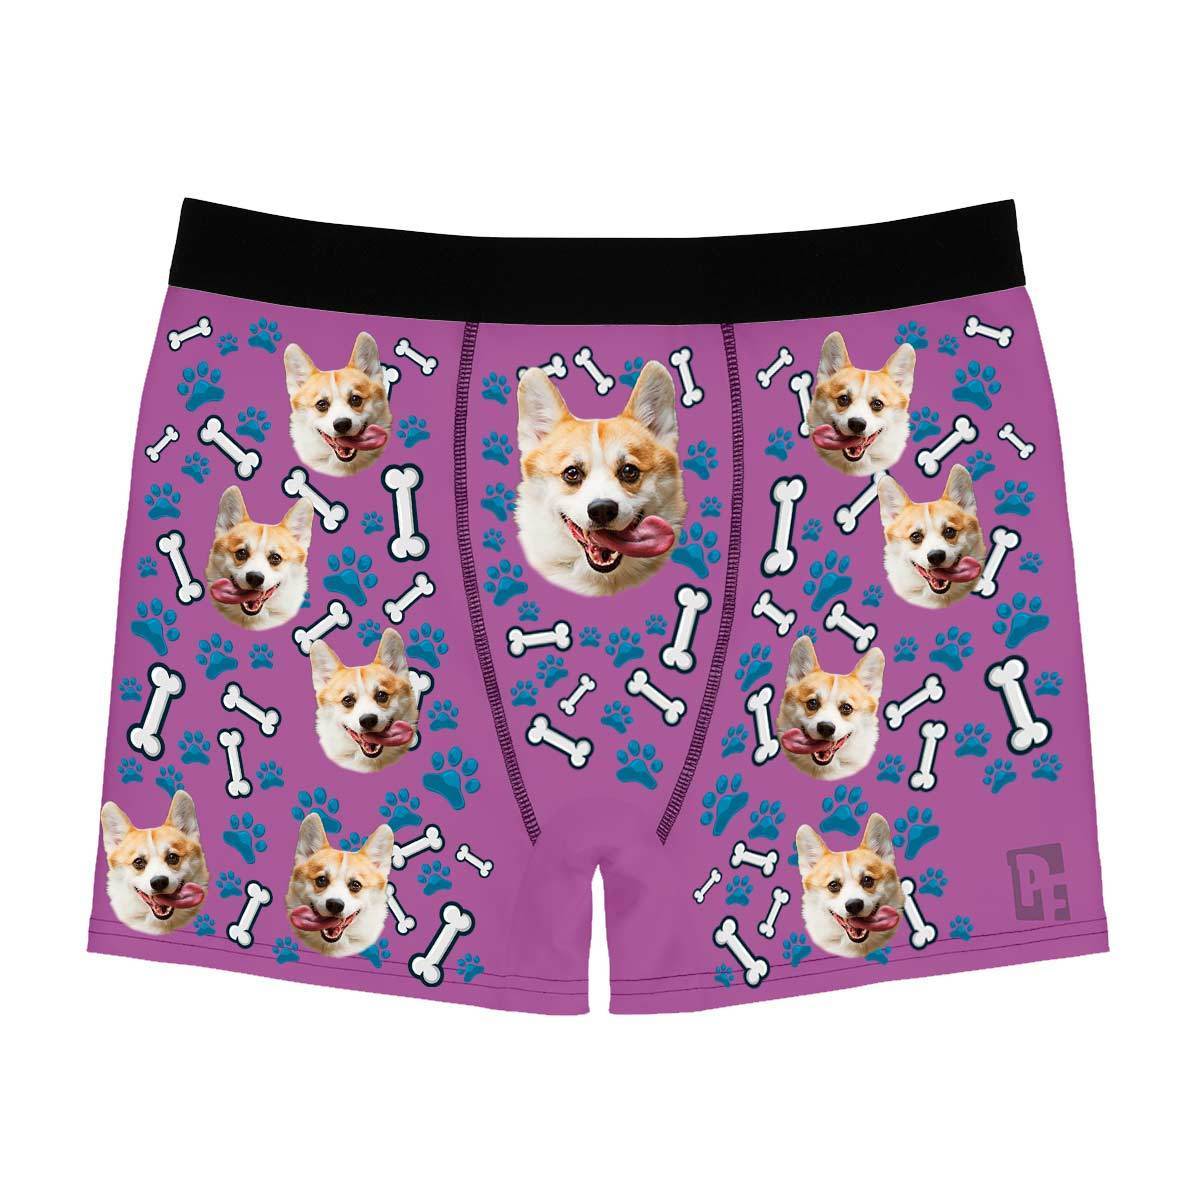 Purple Dog men's boxer briefs personalized with photo printed on them